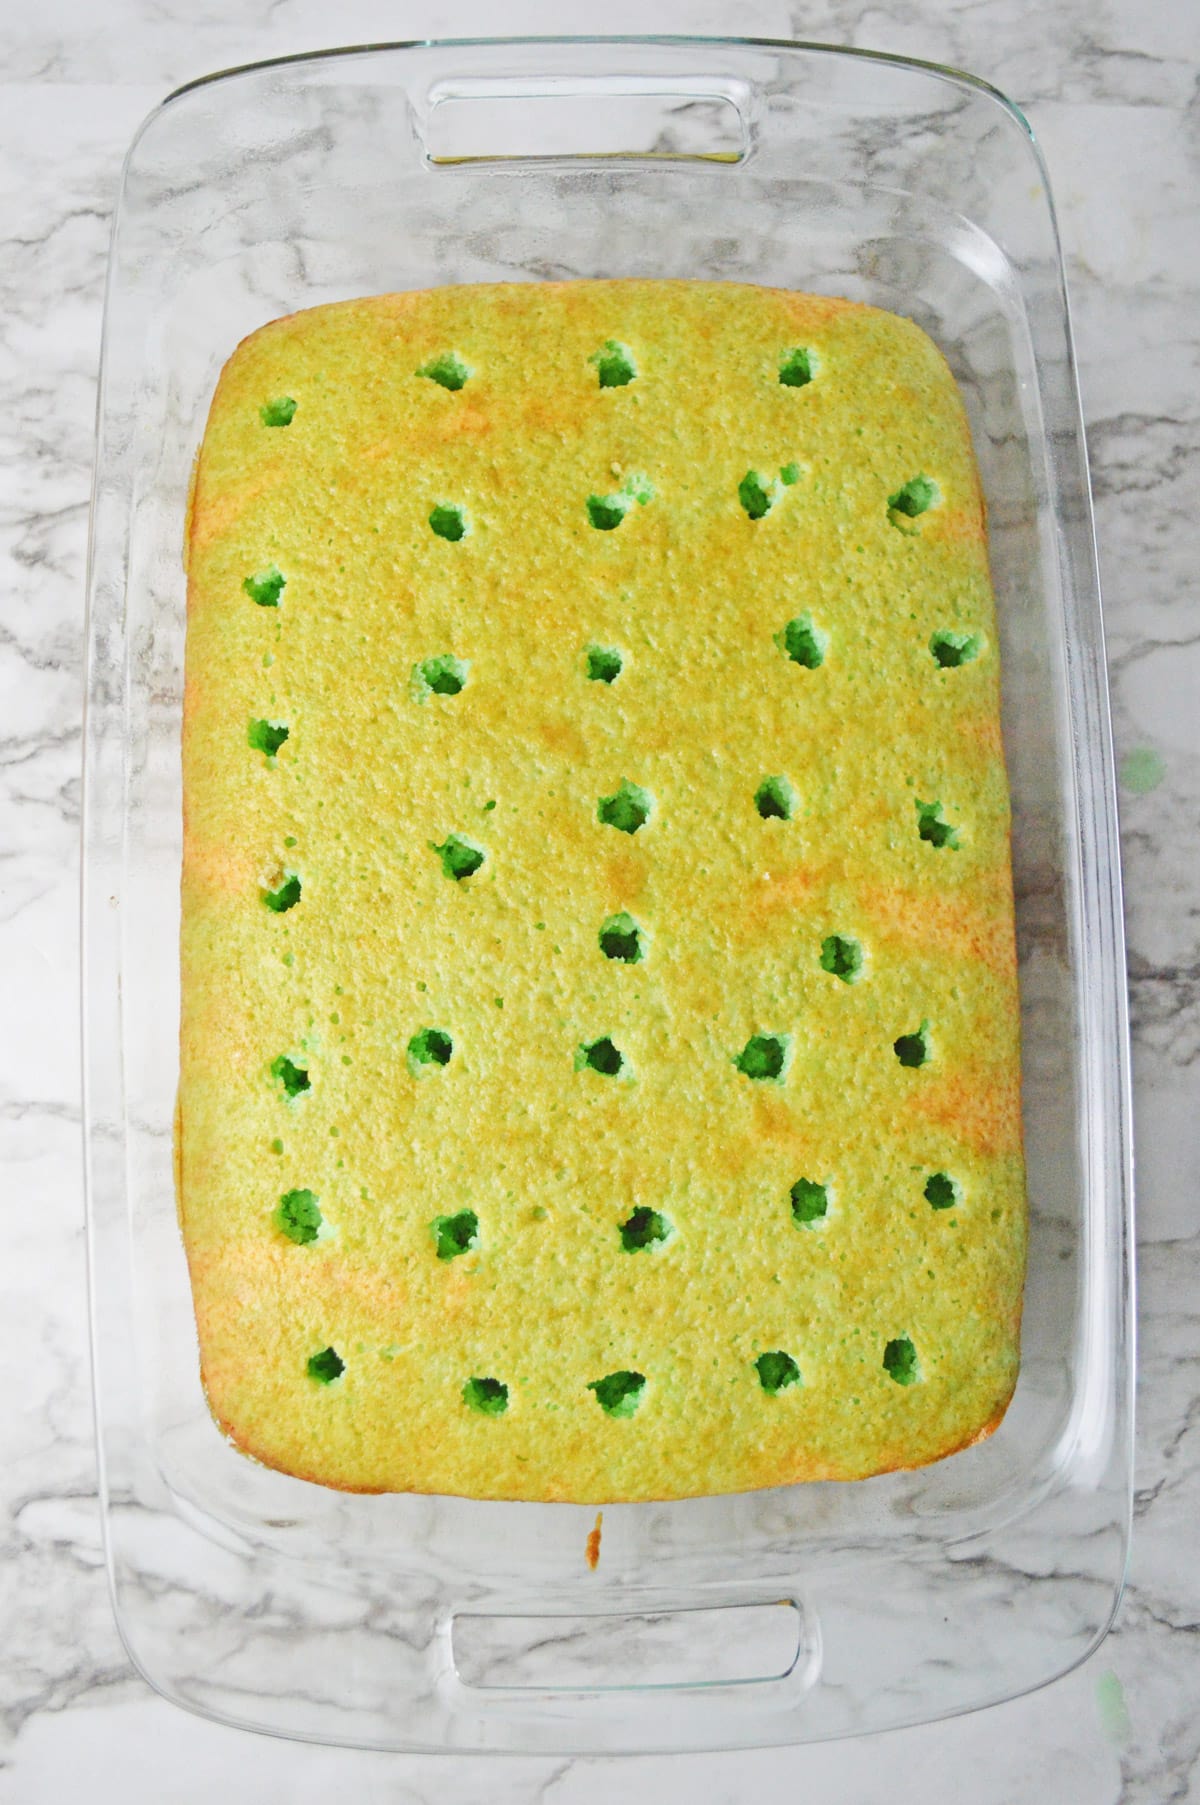 Cake with holes poked in it and jello poured in